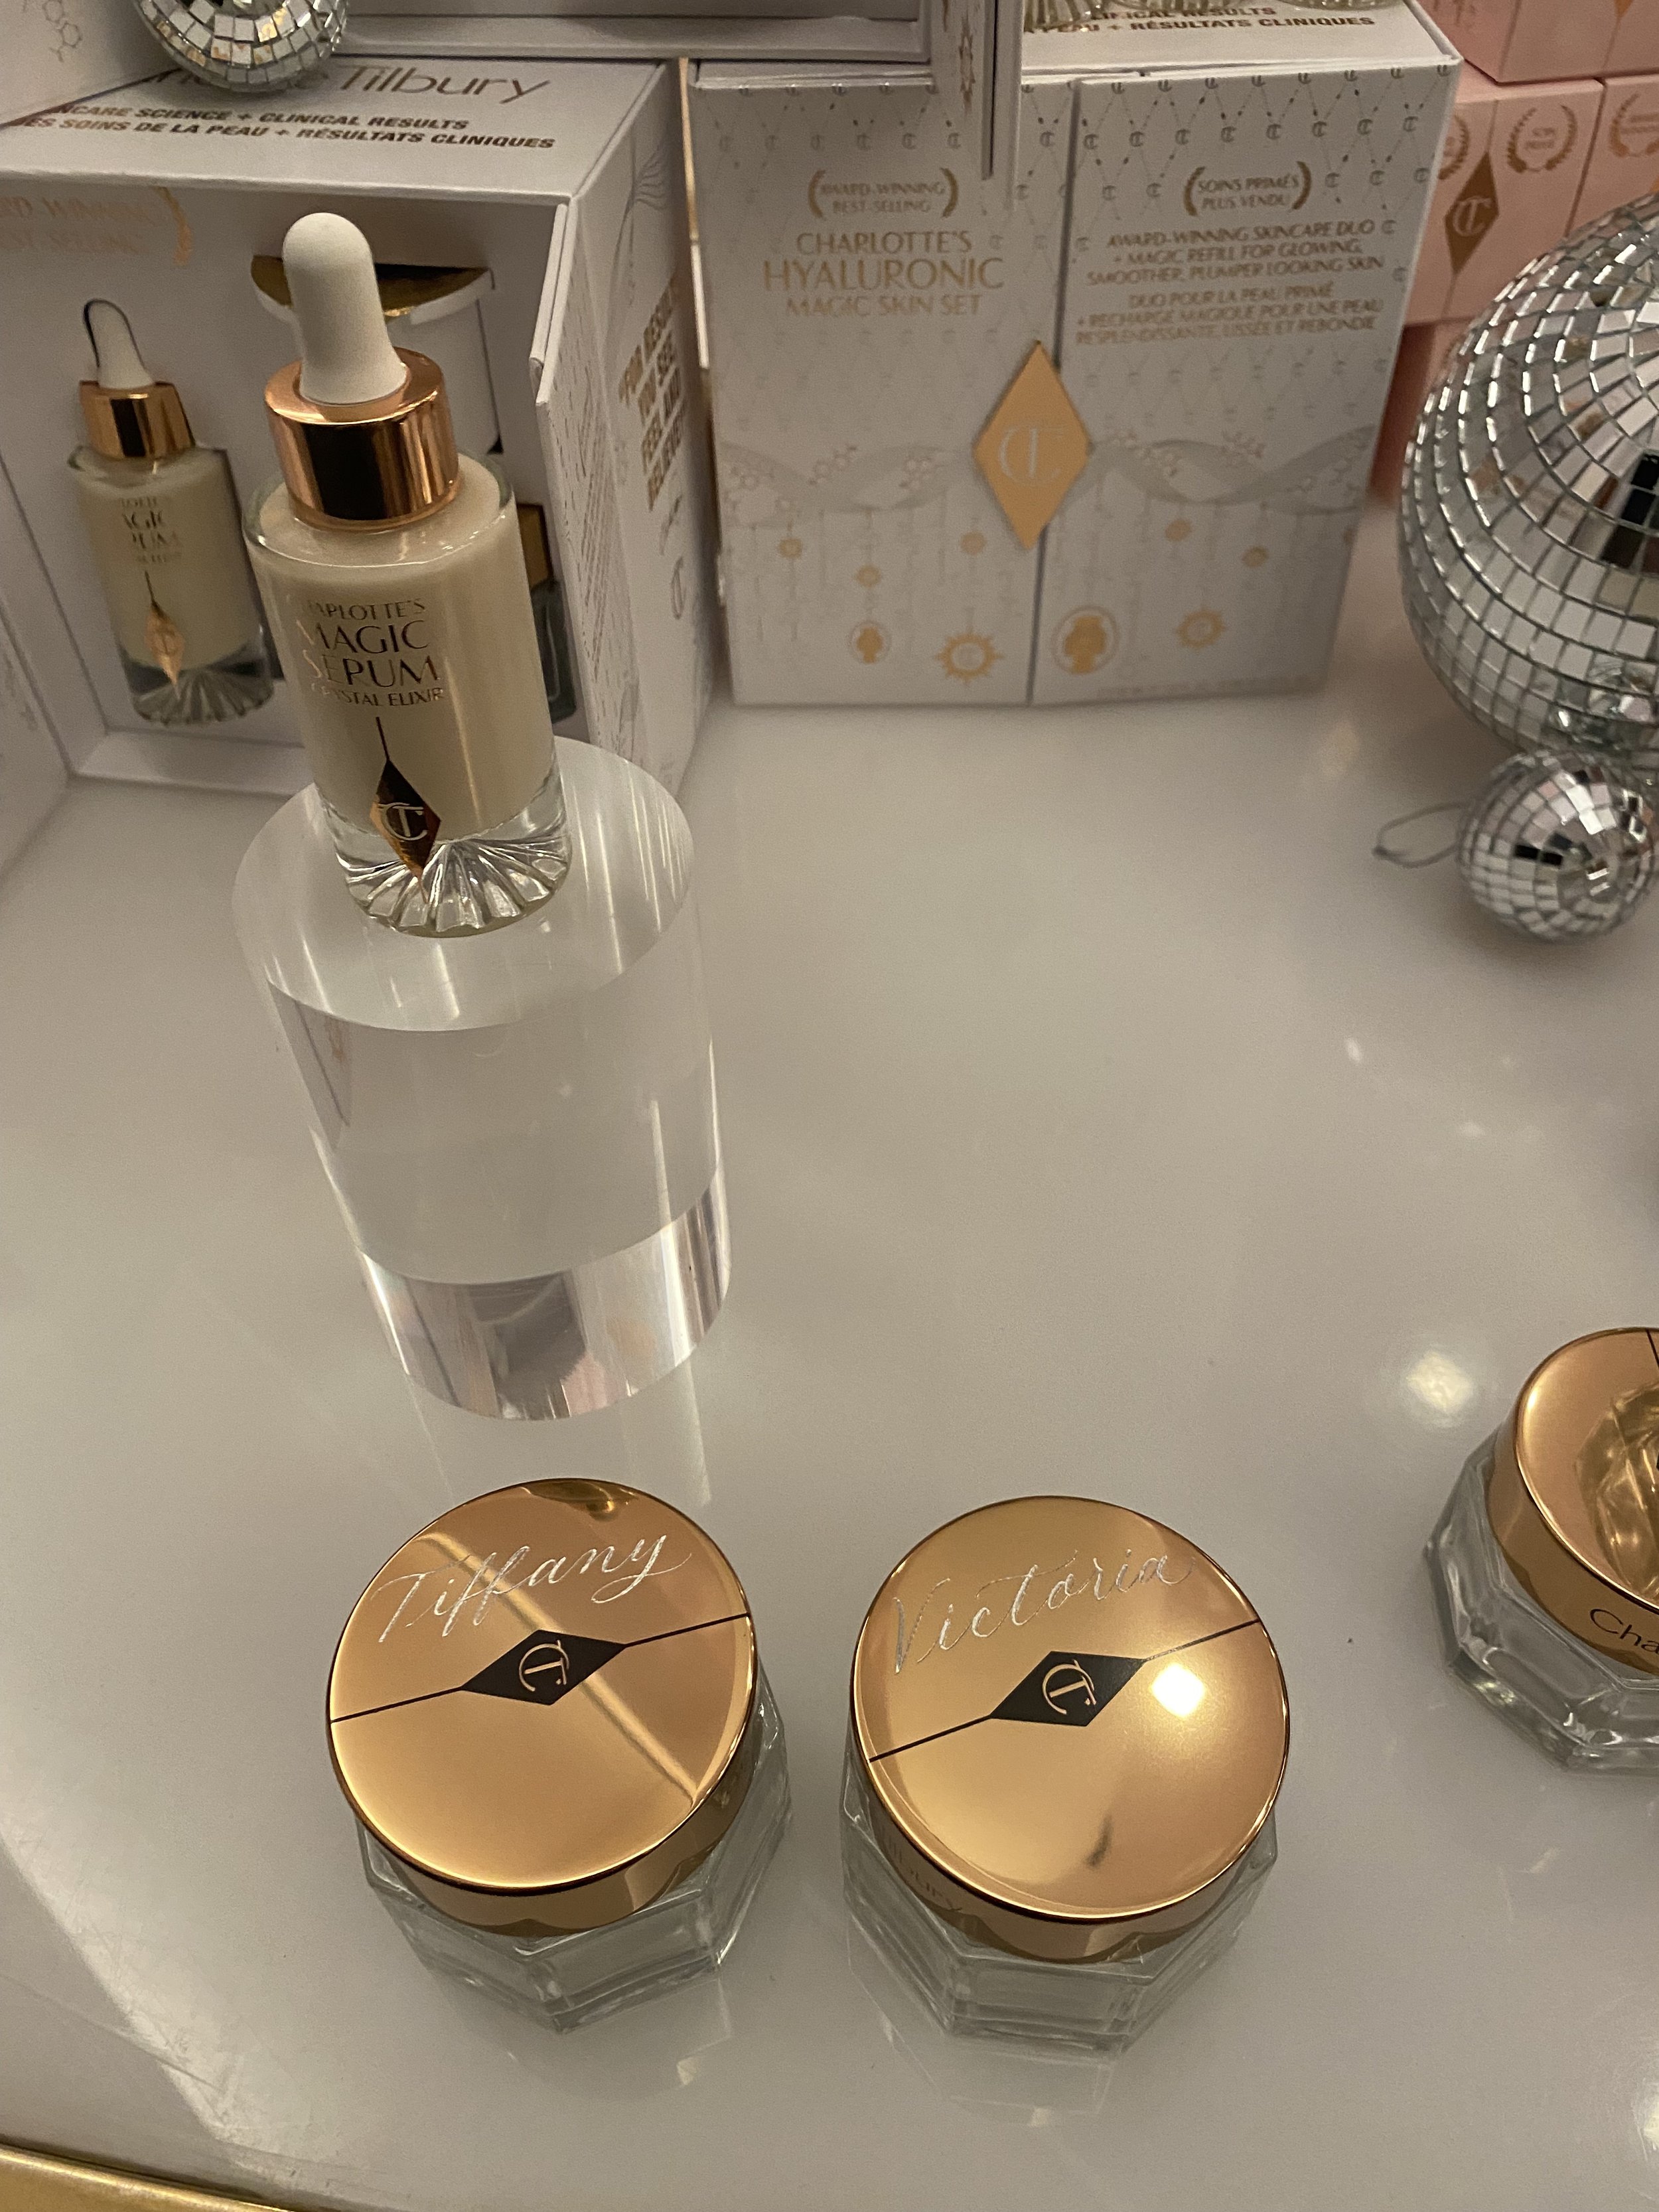 Charlotte-Tilbury-magic-cream-with-engraved-names-at-pr-event.jpeg